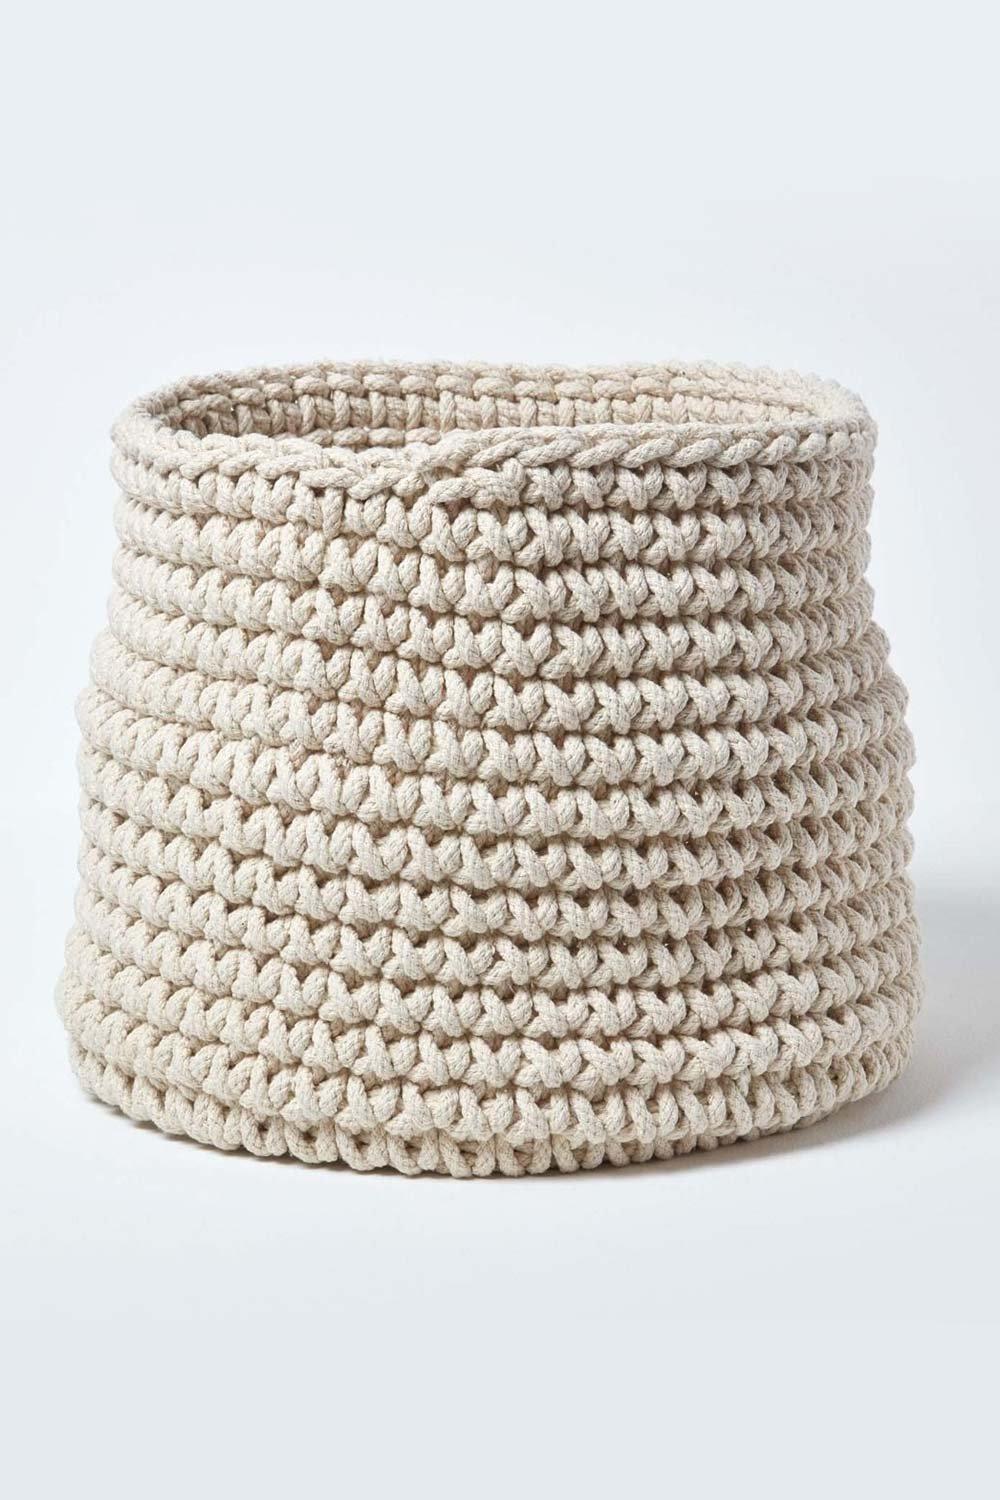 Homescapes Cotton Knitted Round Storage Basket, 42 x 37 cm|natural